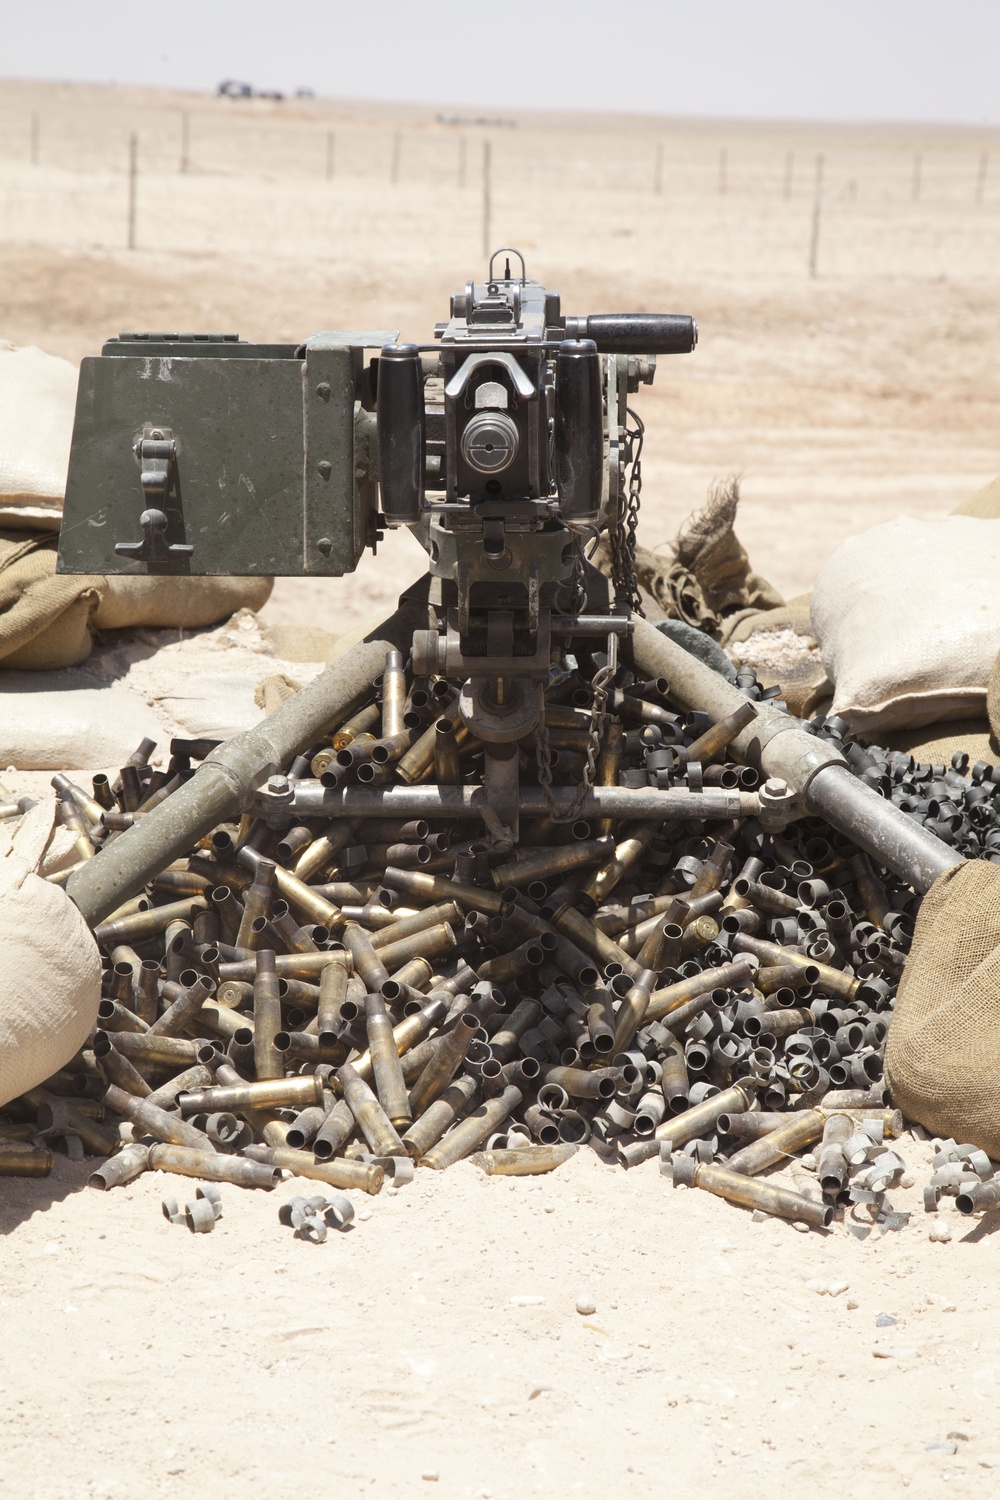 MK19 Automatic Grenade Launcher training range aboard Camp Leatherneck